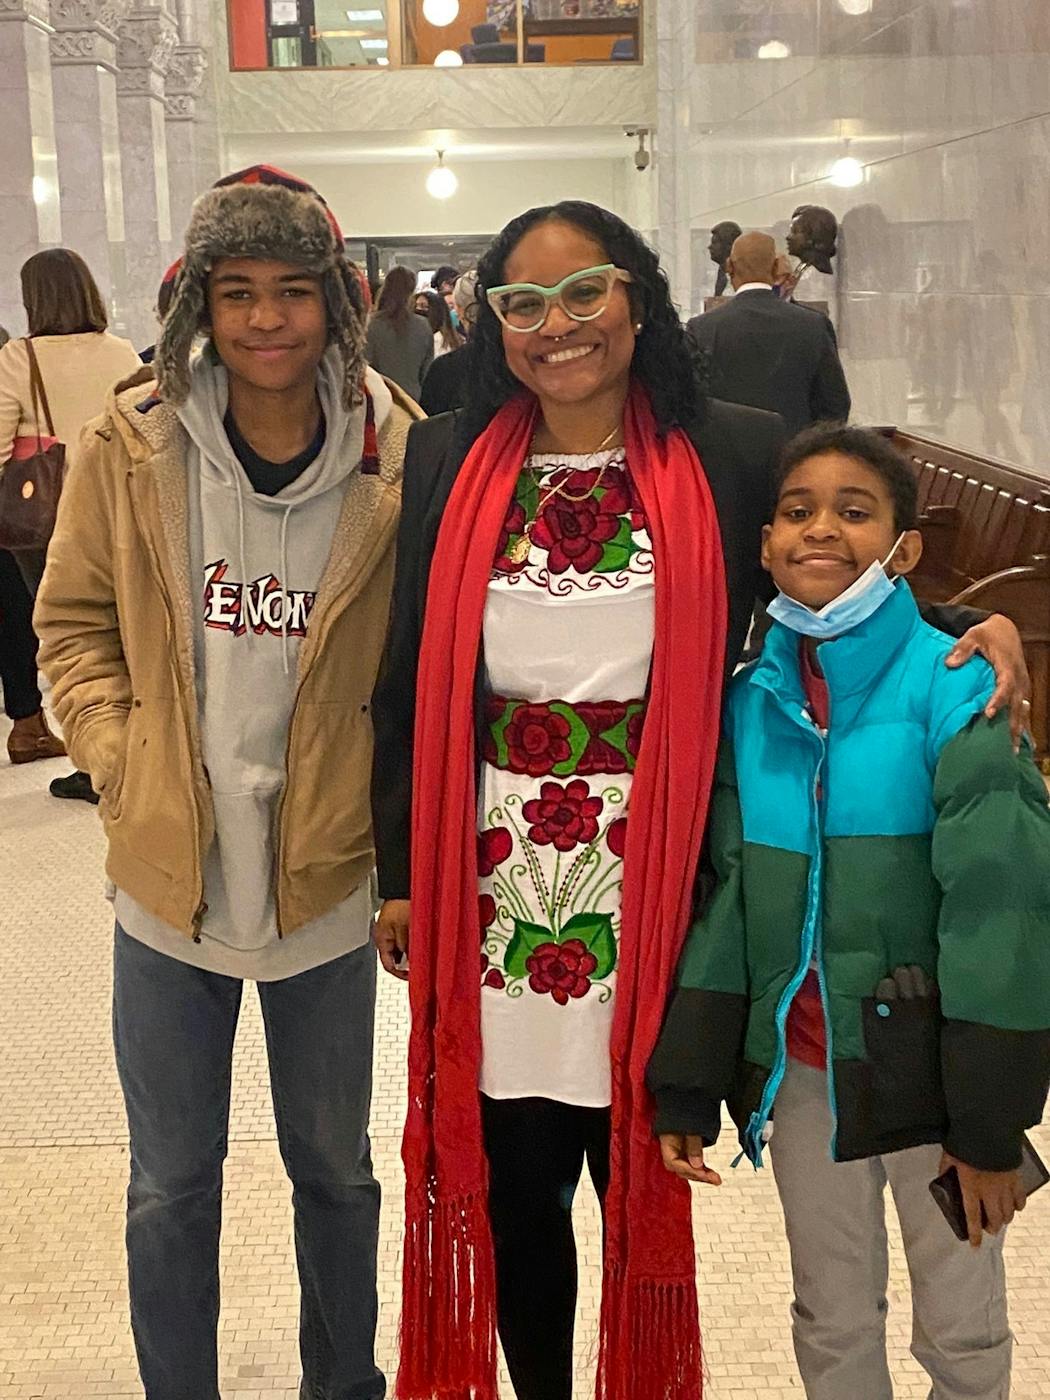 Samantha Pree-Stinson with her sons Gabriel, left, and Noah, right, on Jan. 3, 2022, the day she was sworn in to her seat on the Minneapolis Board of Estimate and Taxation.